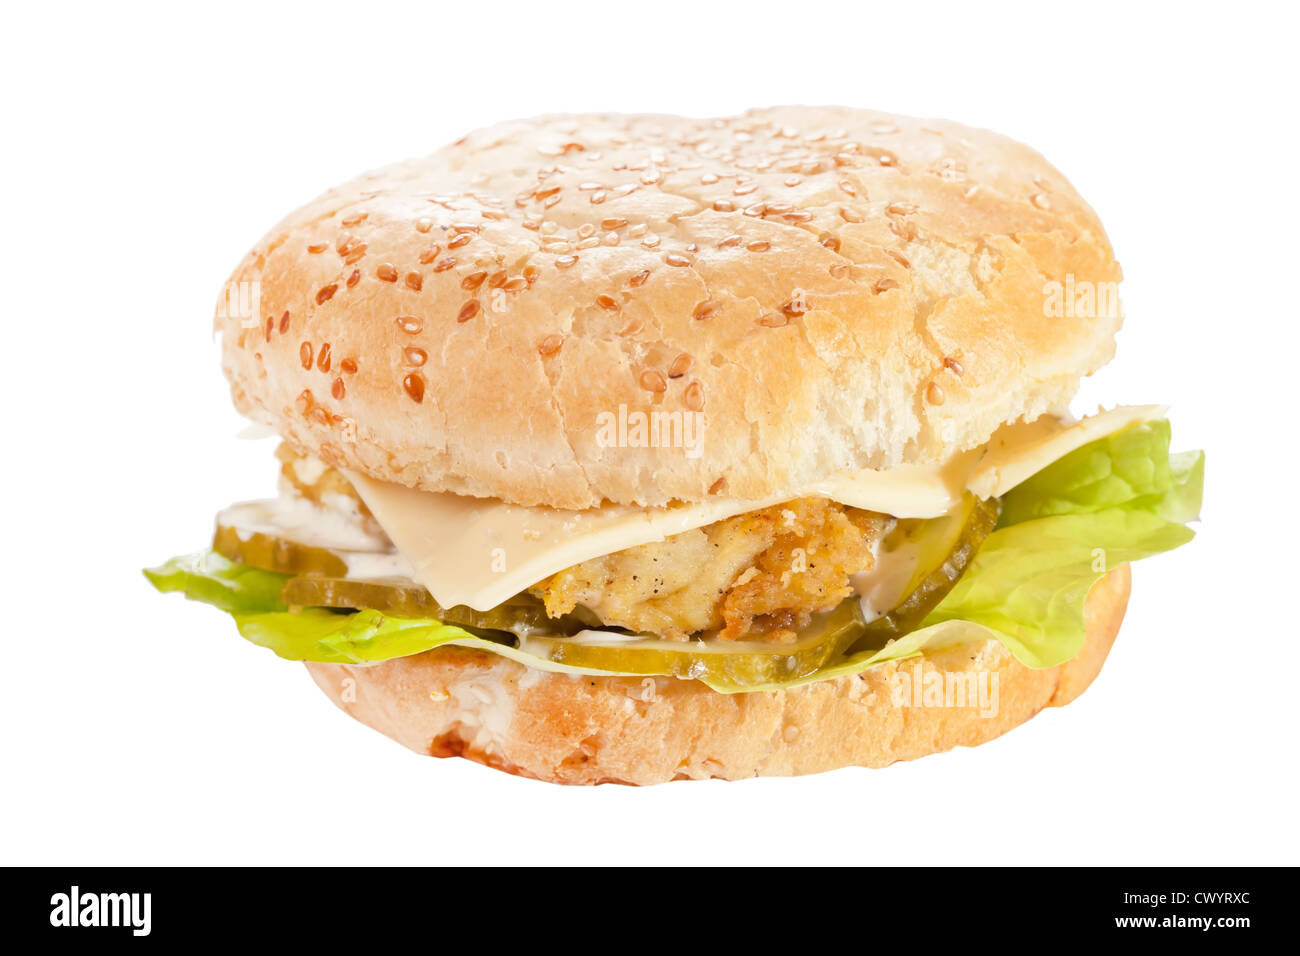 cheeseburger on the plate Stock Photo